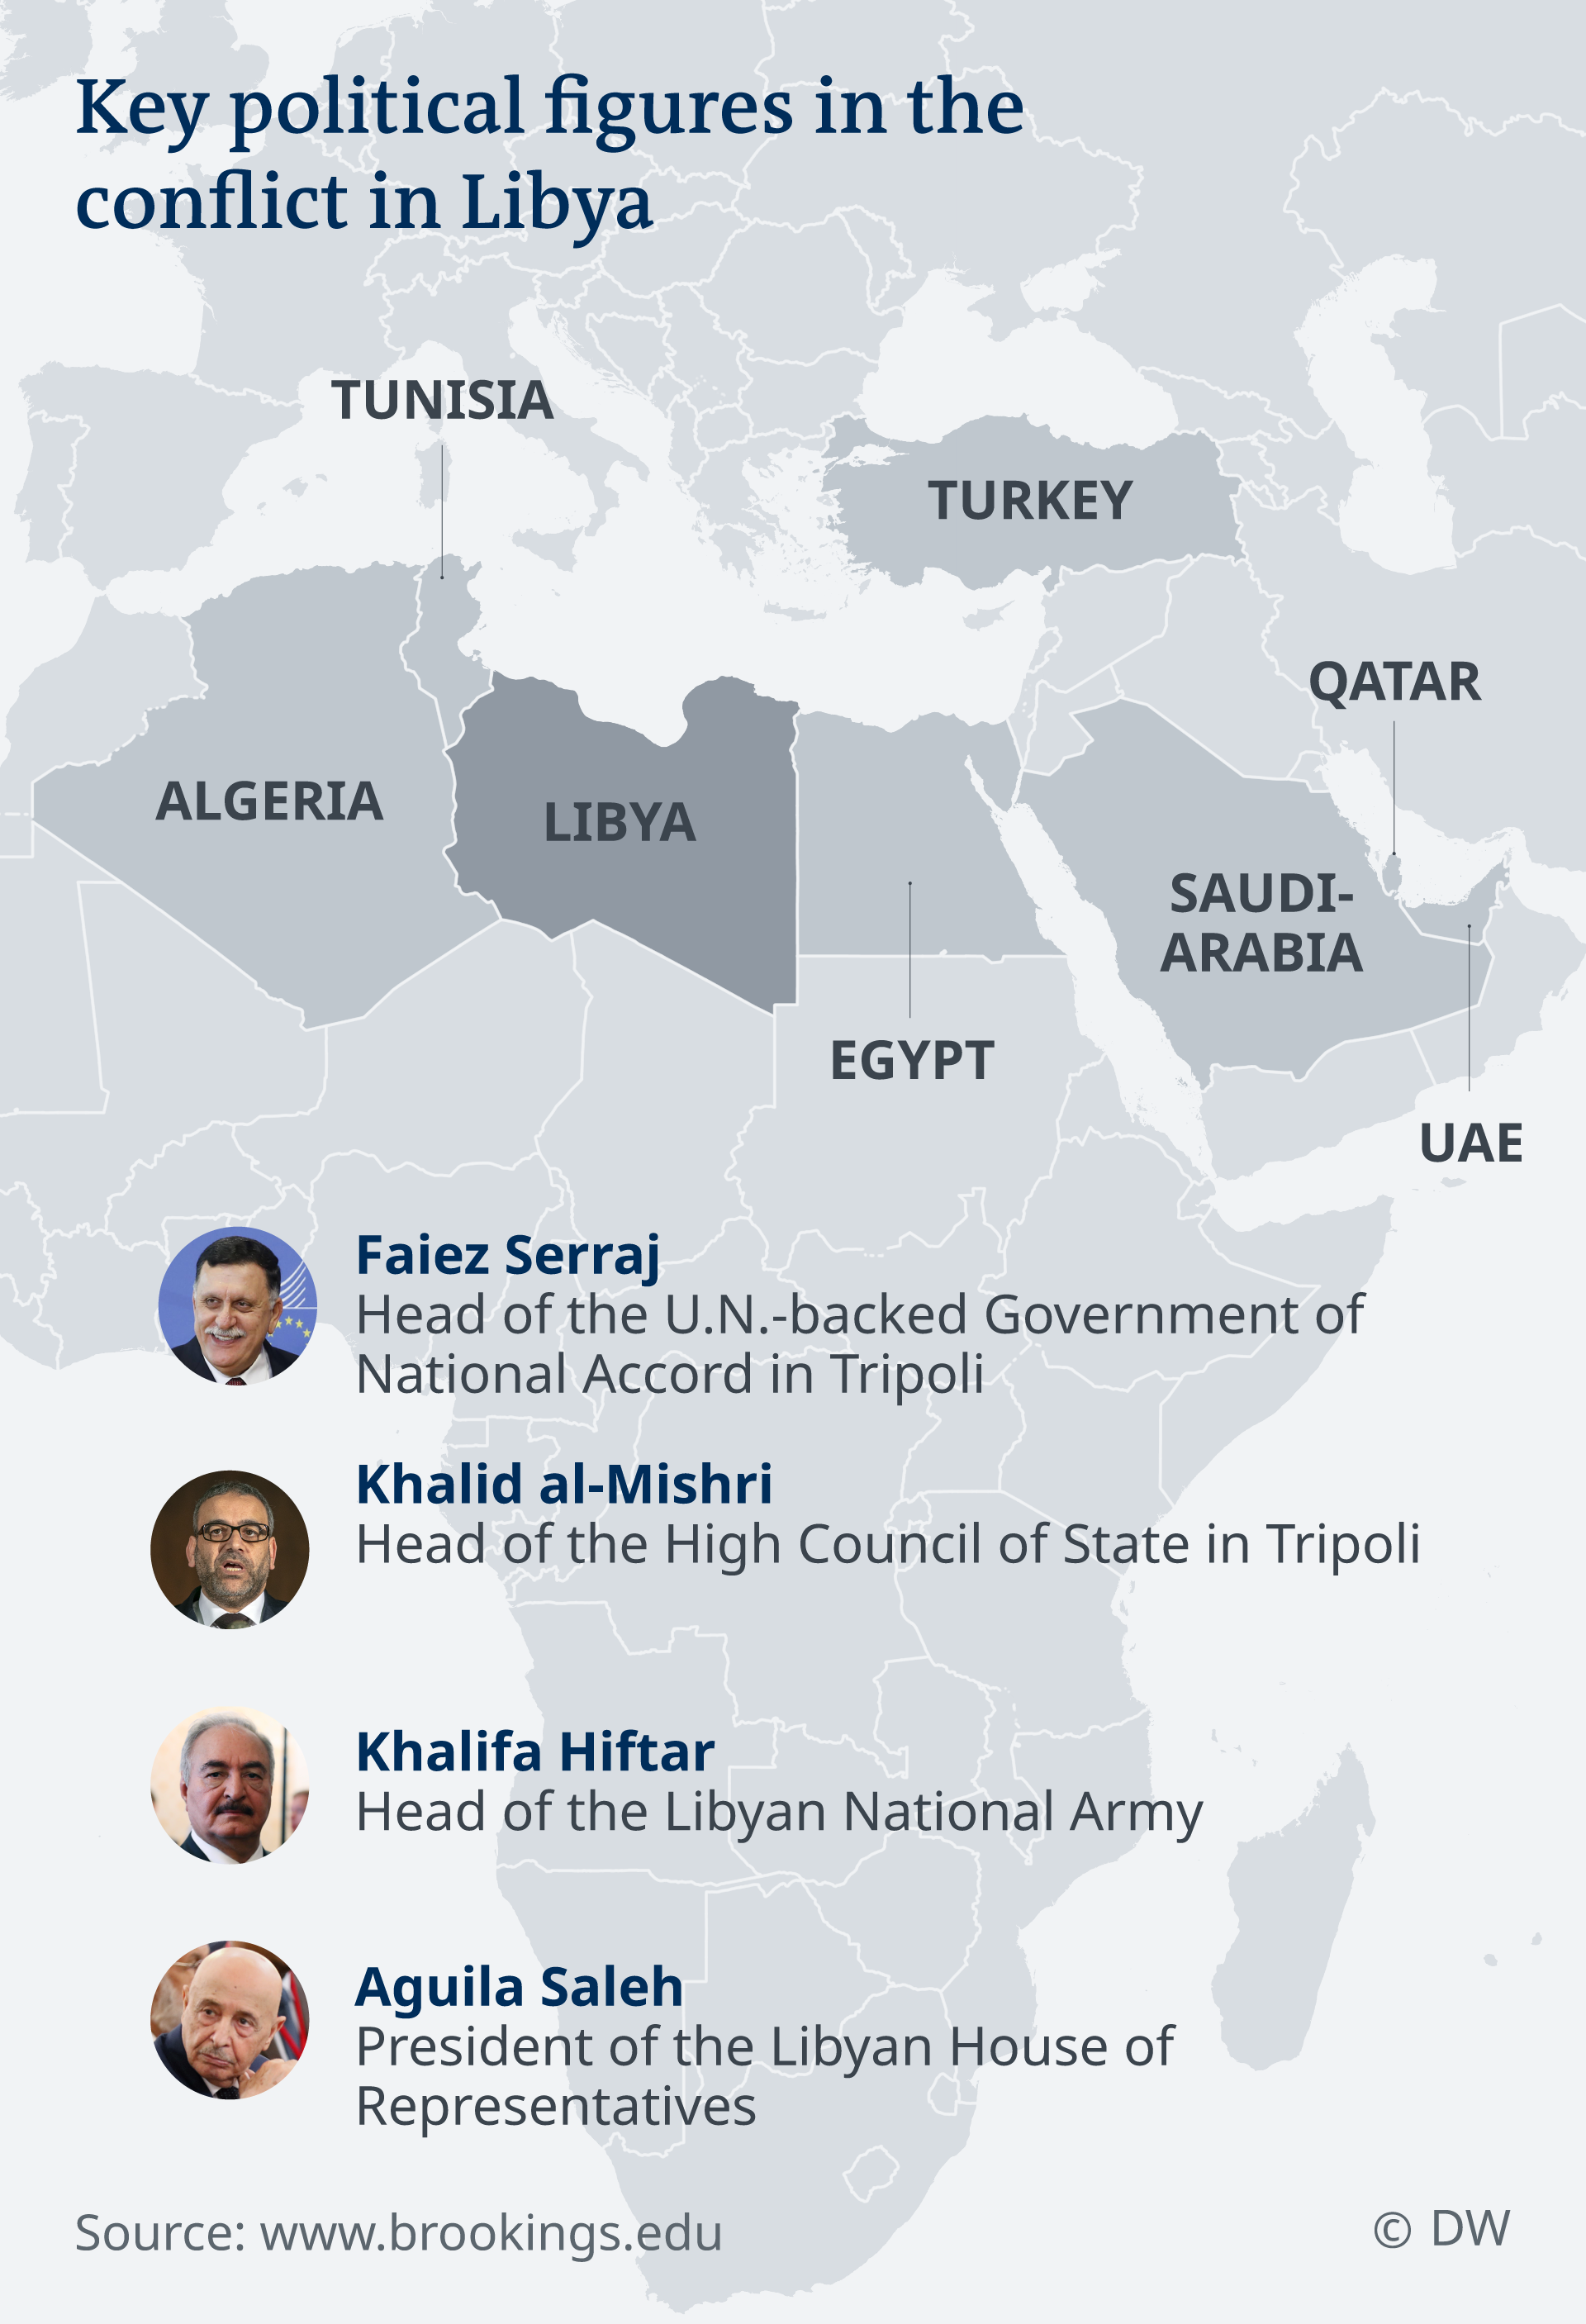 Infographic: Key political figures in the conflict in Libya (source: DW)